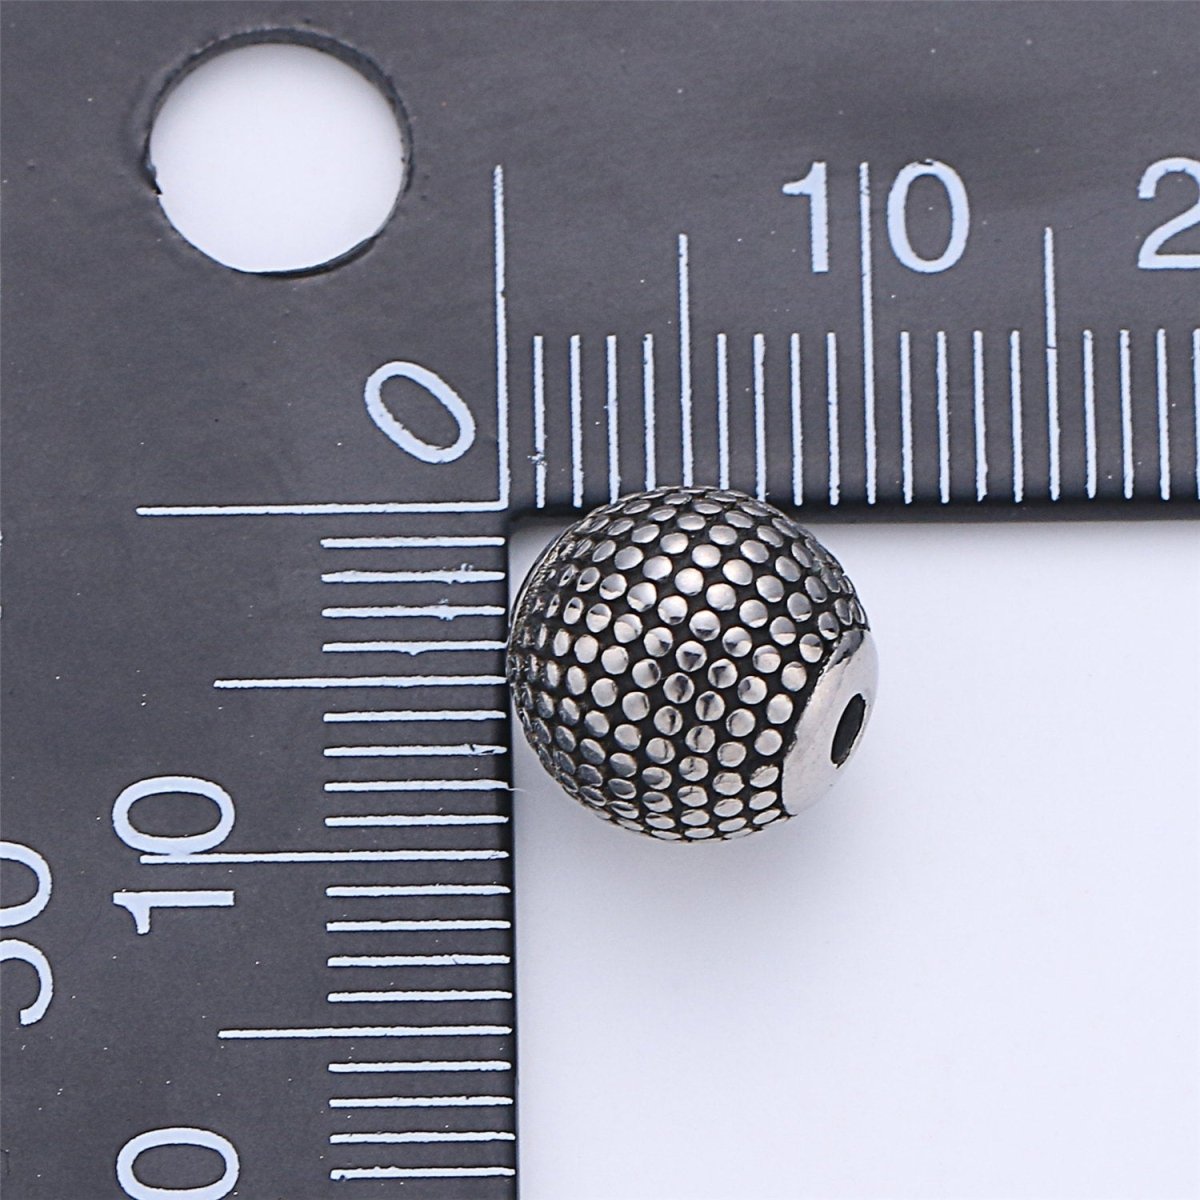 Stainless Steel Disco Ball Charm Spacer Bead, for DIY Jewelry Making European Charms Beaded Bracelet, Bead Size 11x10mm B-432 - DLUXCA